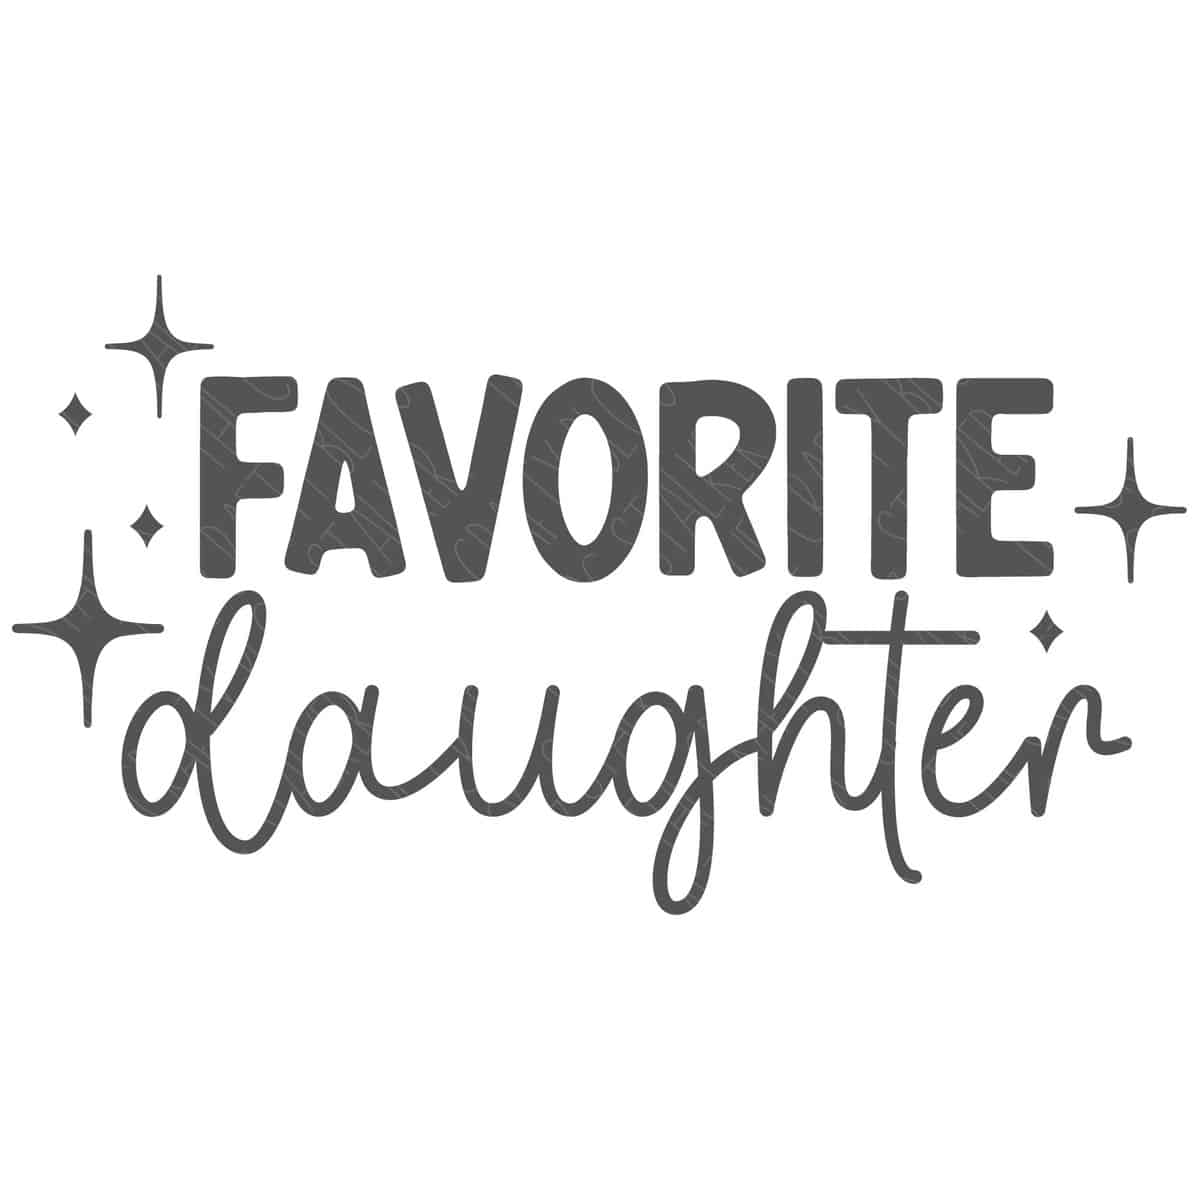 Favorite Daughter SVG	

			
		
	

		
			$3.00 – Buy Now Checkout
							
					
						
							
						
						Added to cart